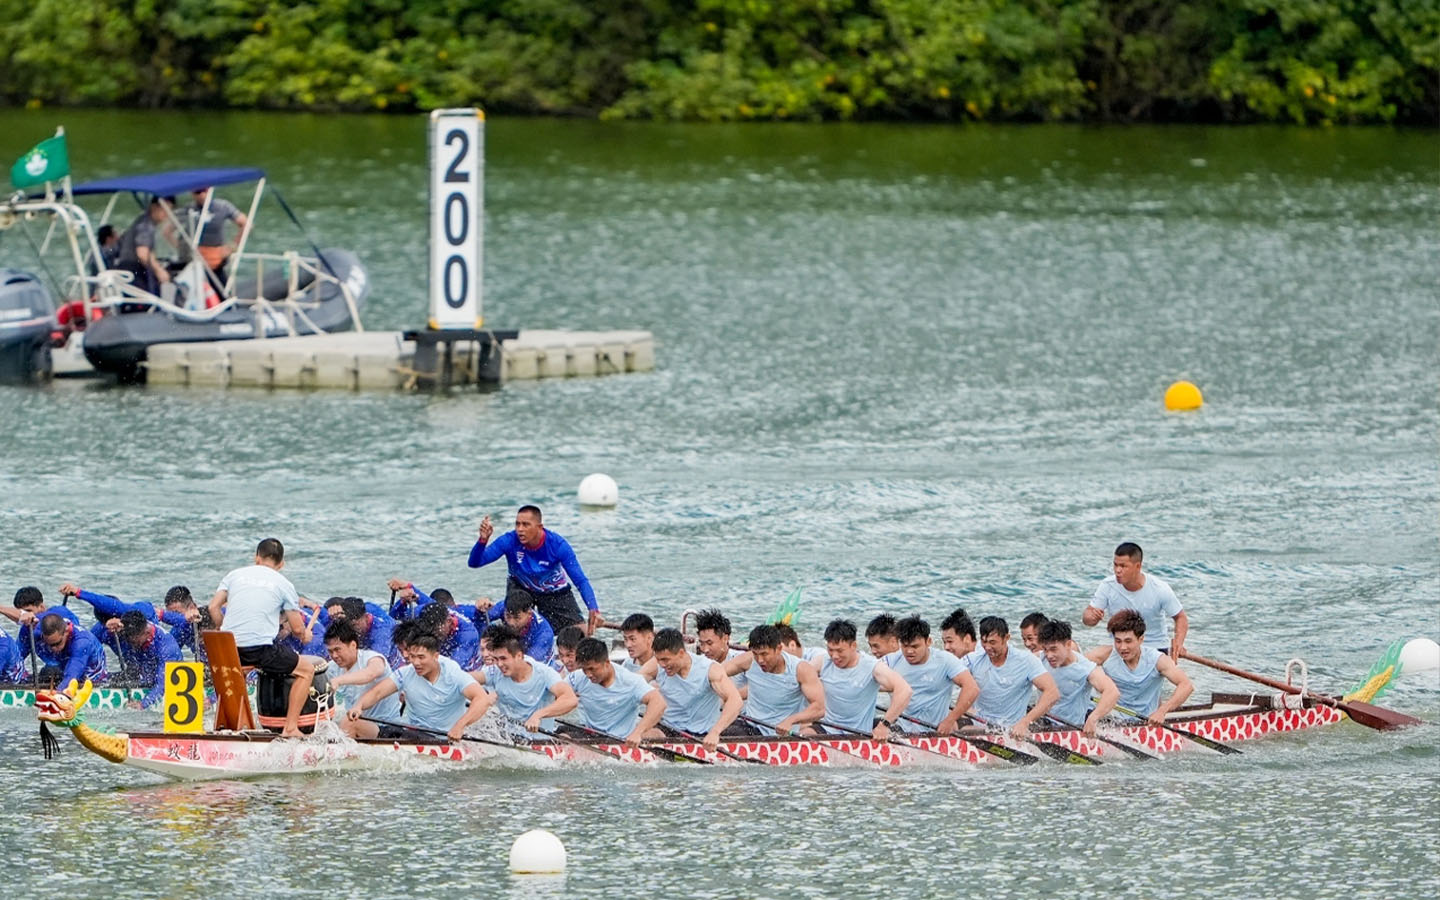 Macao’s international dragon boat finals took place on Monday